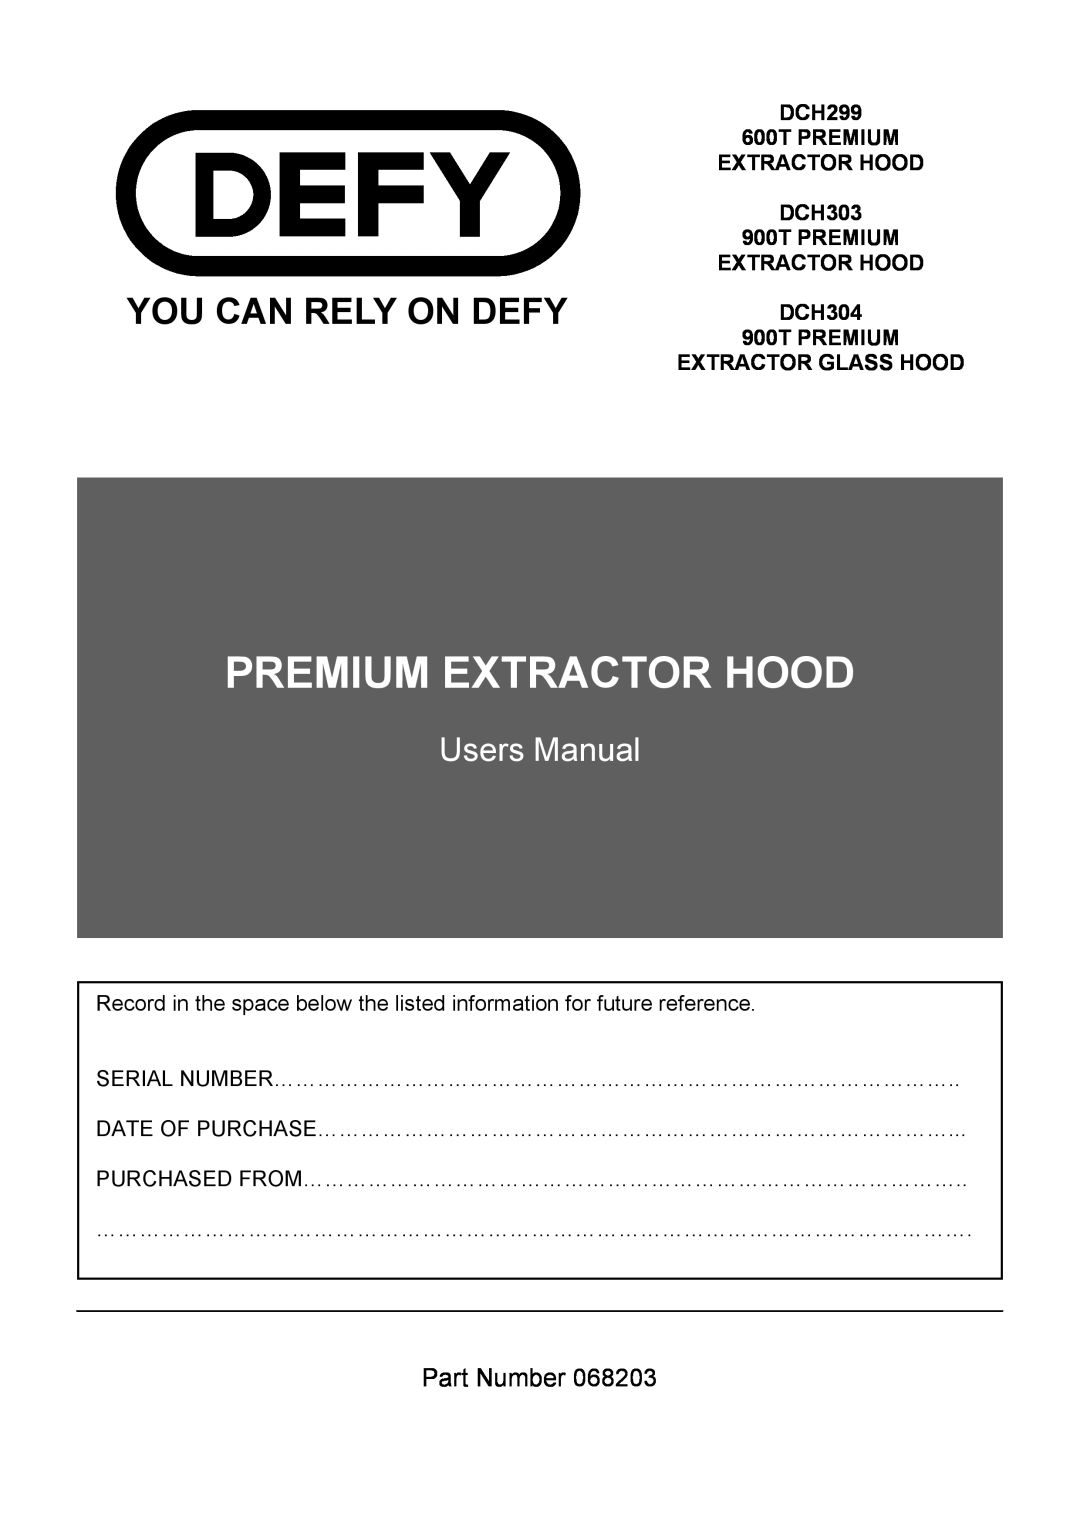 Defy Appliances DCH299, DCH304, DCH303 user manual Premium Extractor Hood, You Can Rely On Defy, Part Number 